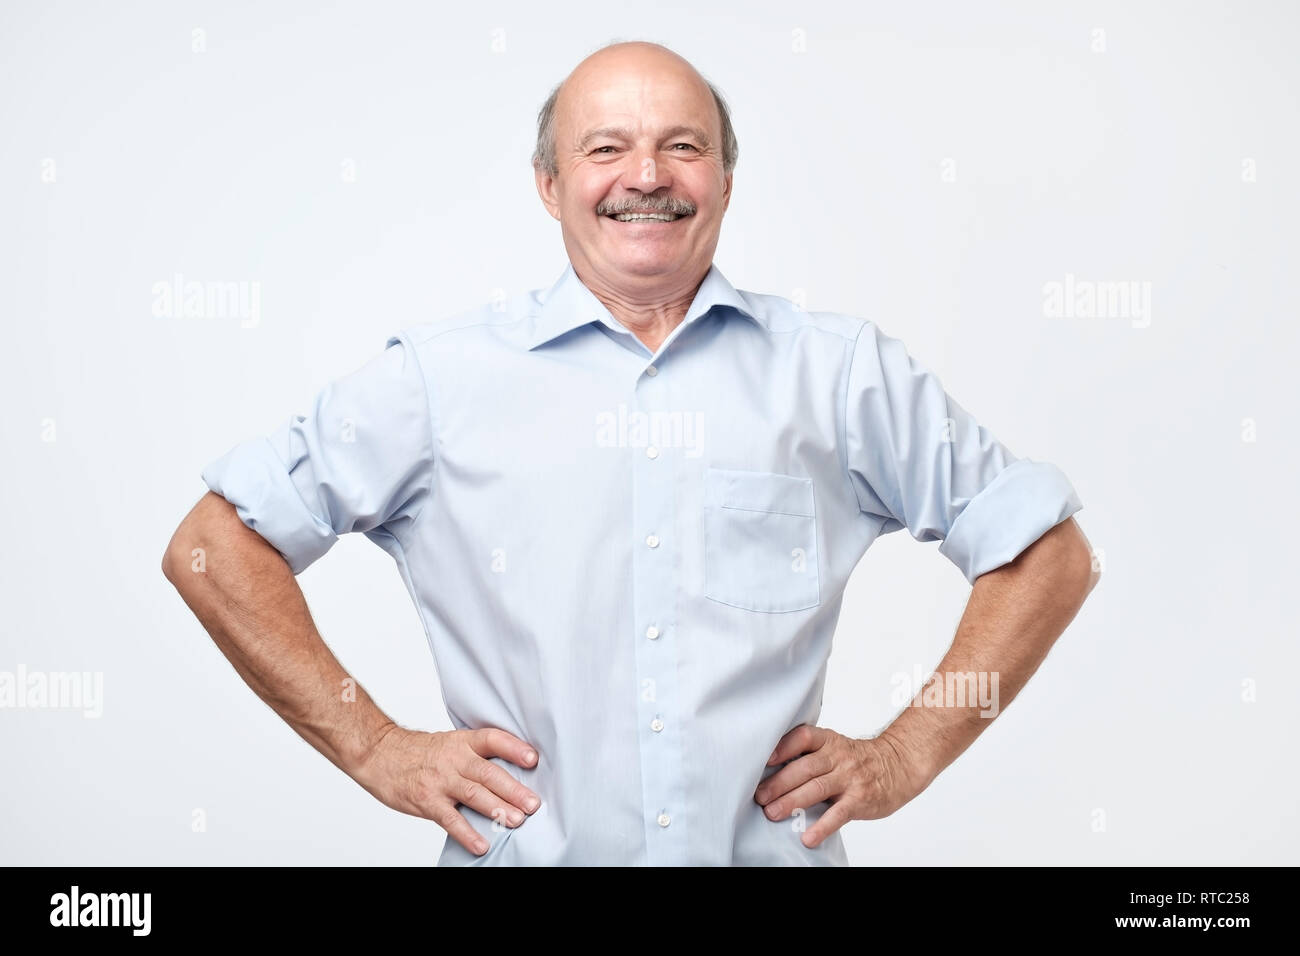 senior handsome man with a proud, satisfied and happy look, with both hands on hips, as if confidently facing a challenge. Akimbo arms pose with a bro Stock Photo